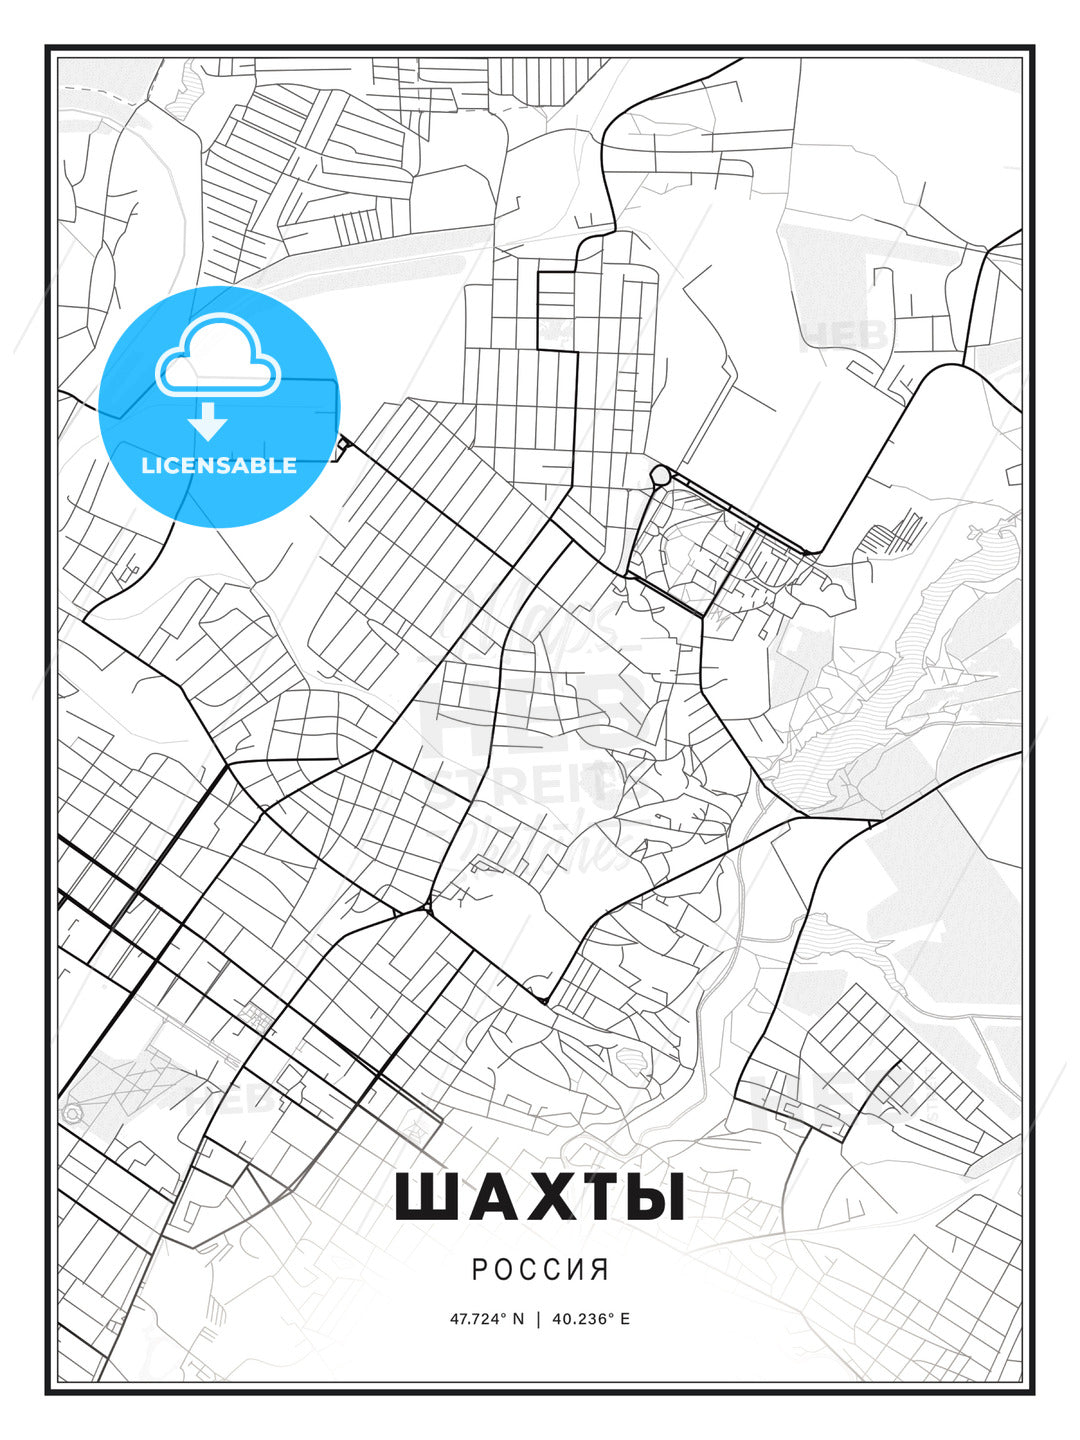 ШАХТЫ / Shakhty, Russia, Modern Print Template in Various Formats - HEBSTREITS Sketches